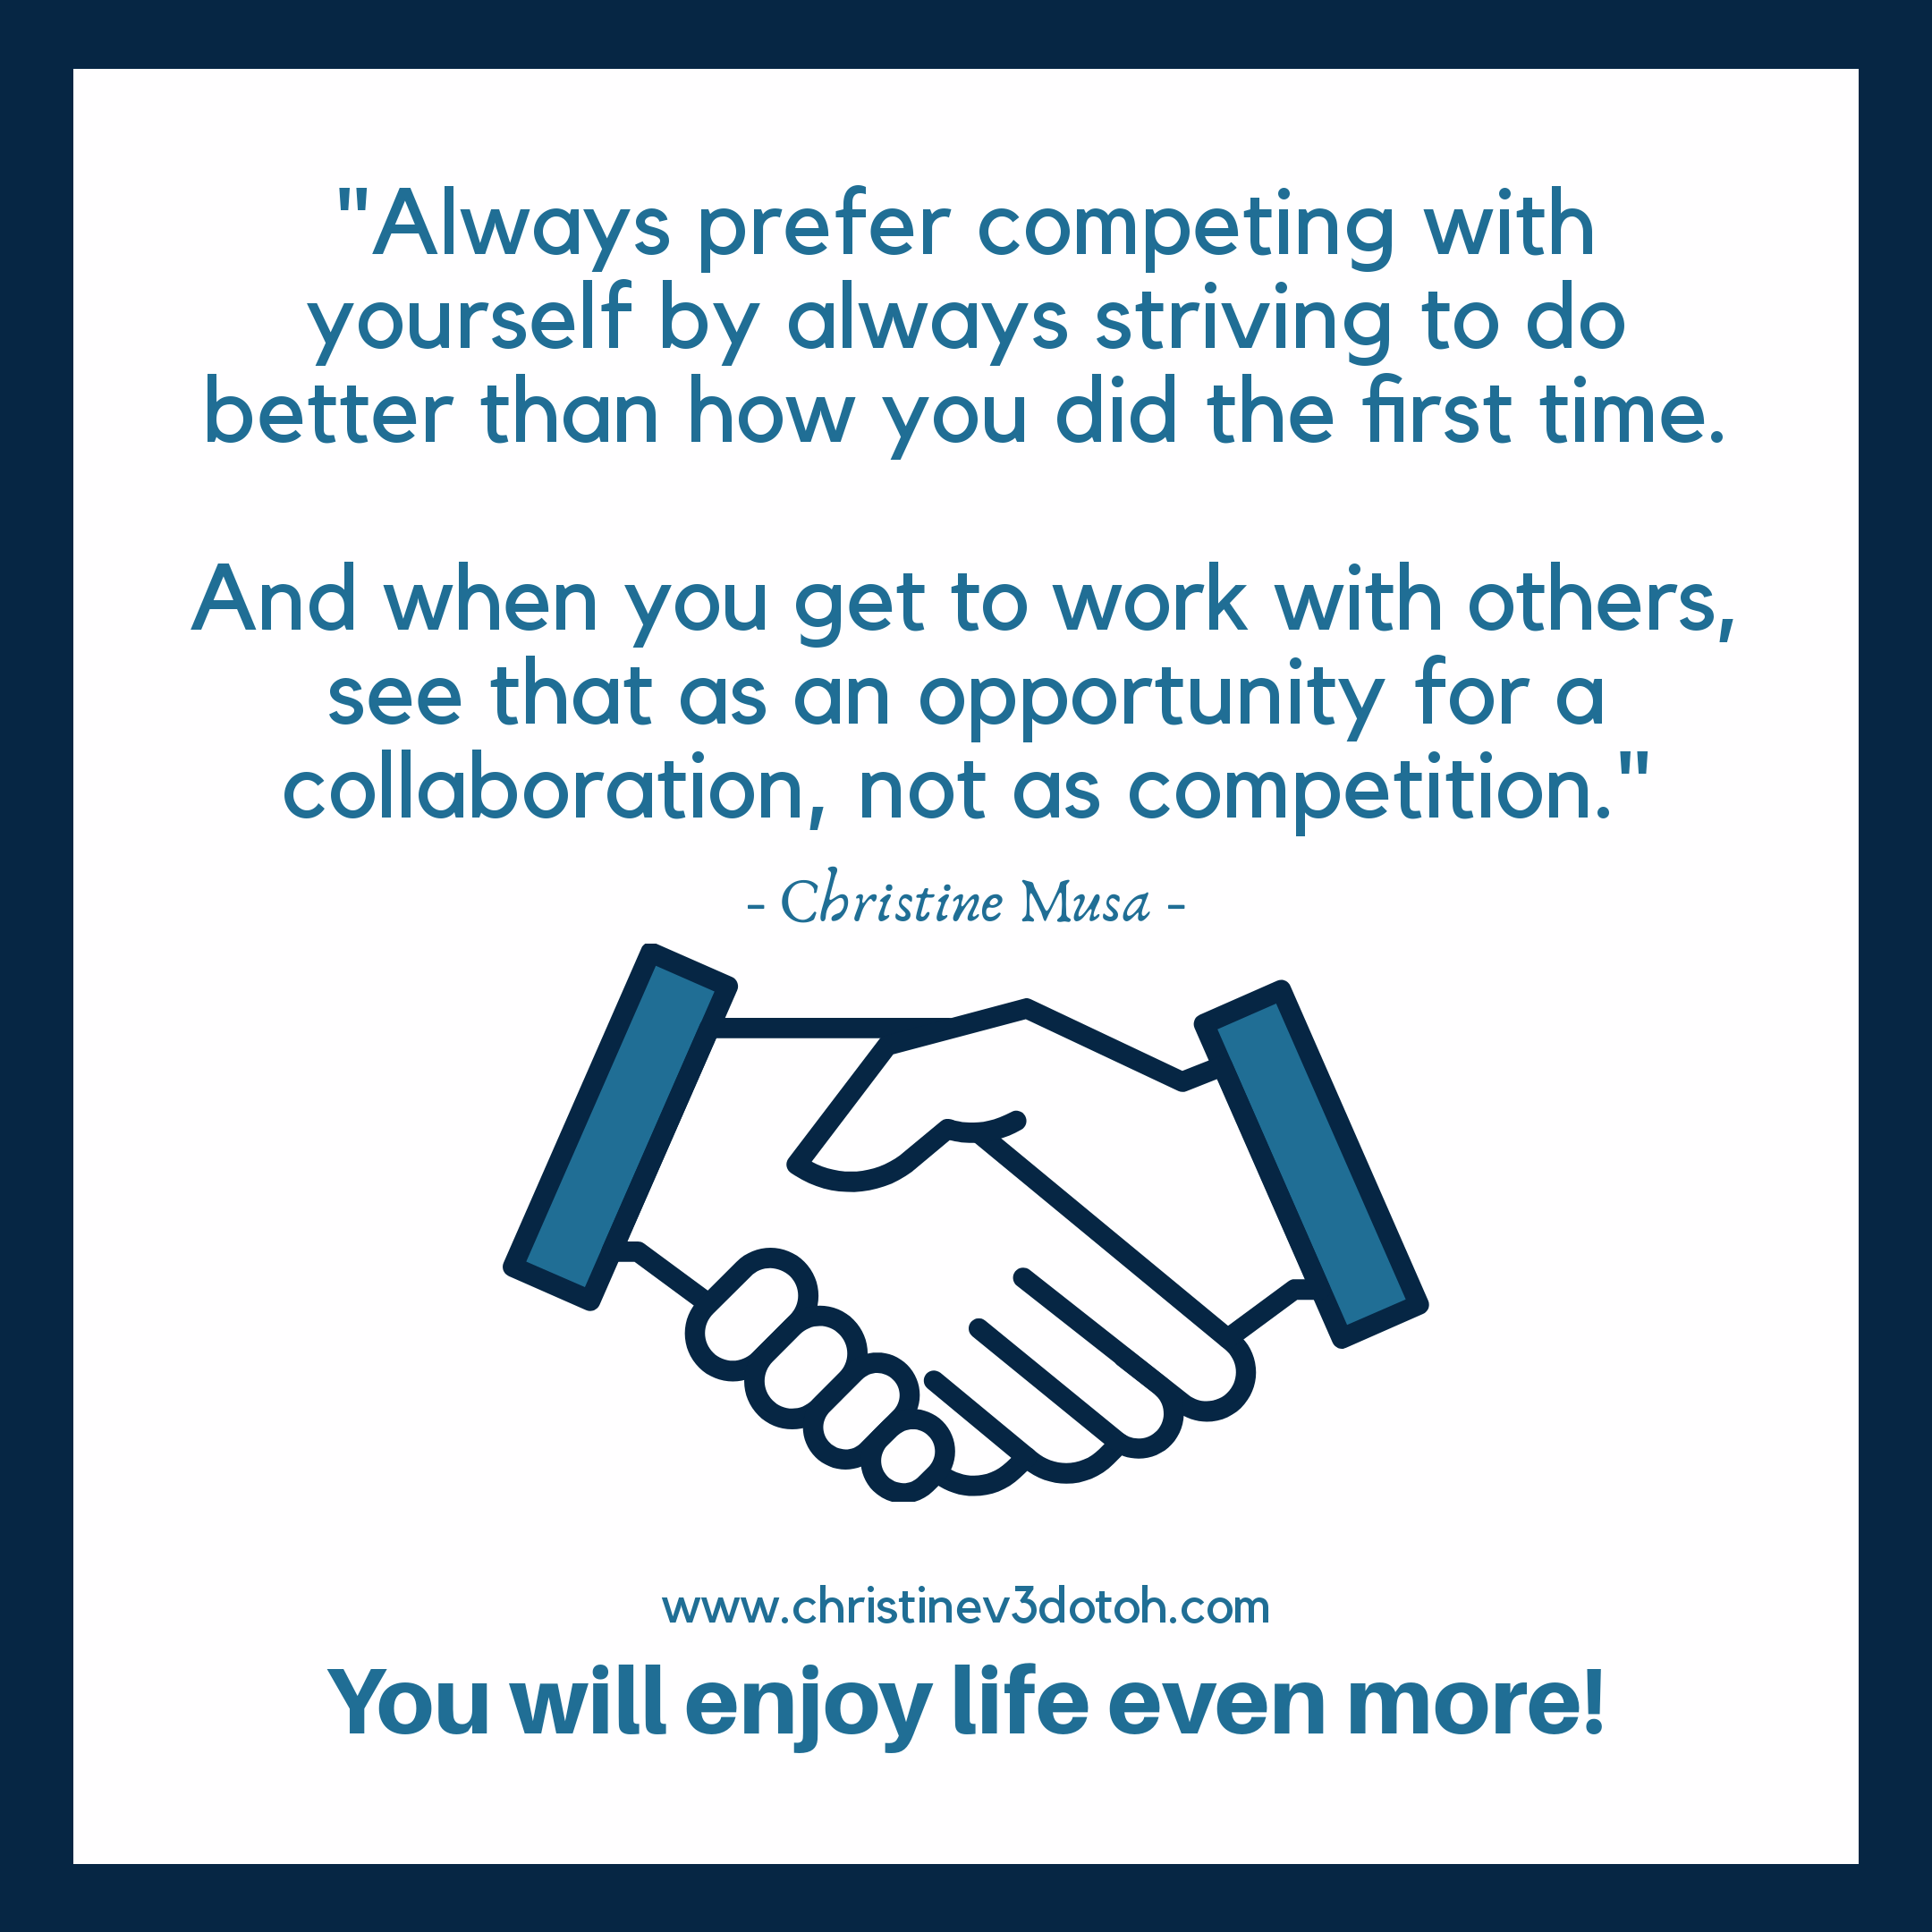 115.-Prefer-Competing-With-Your-Own-Self